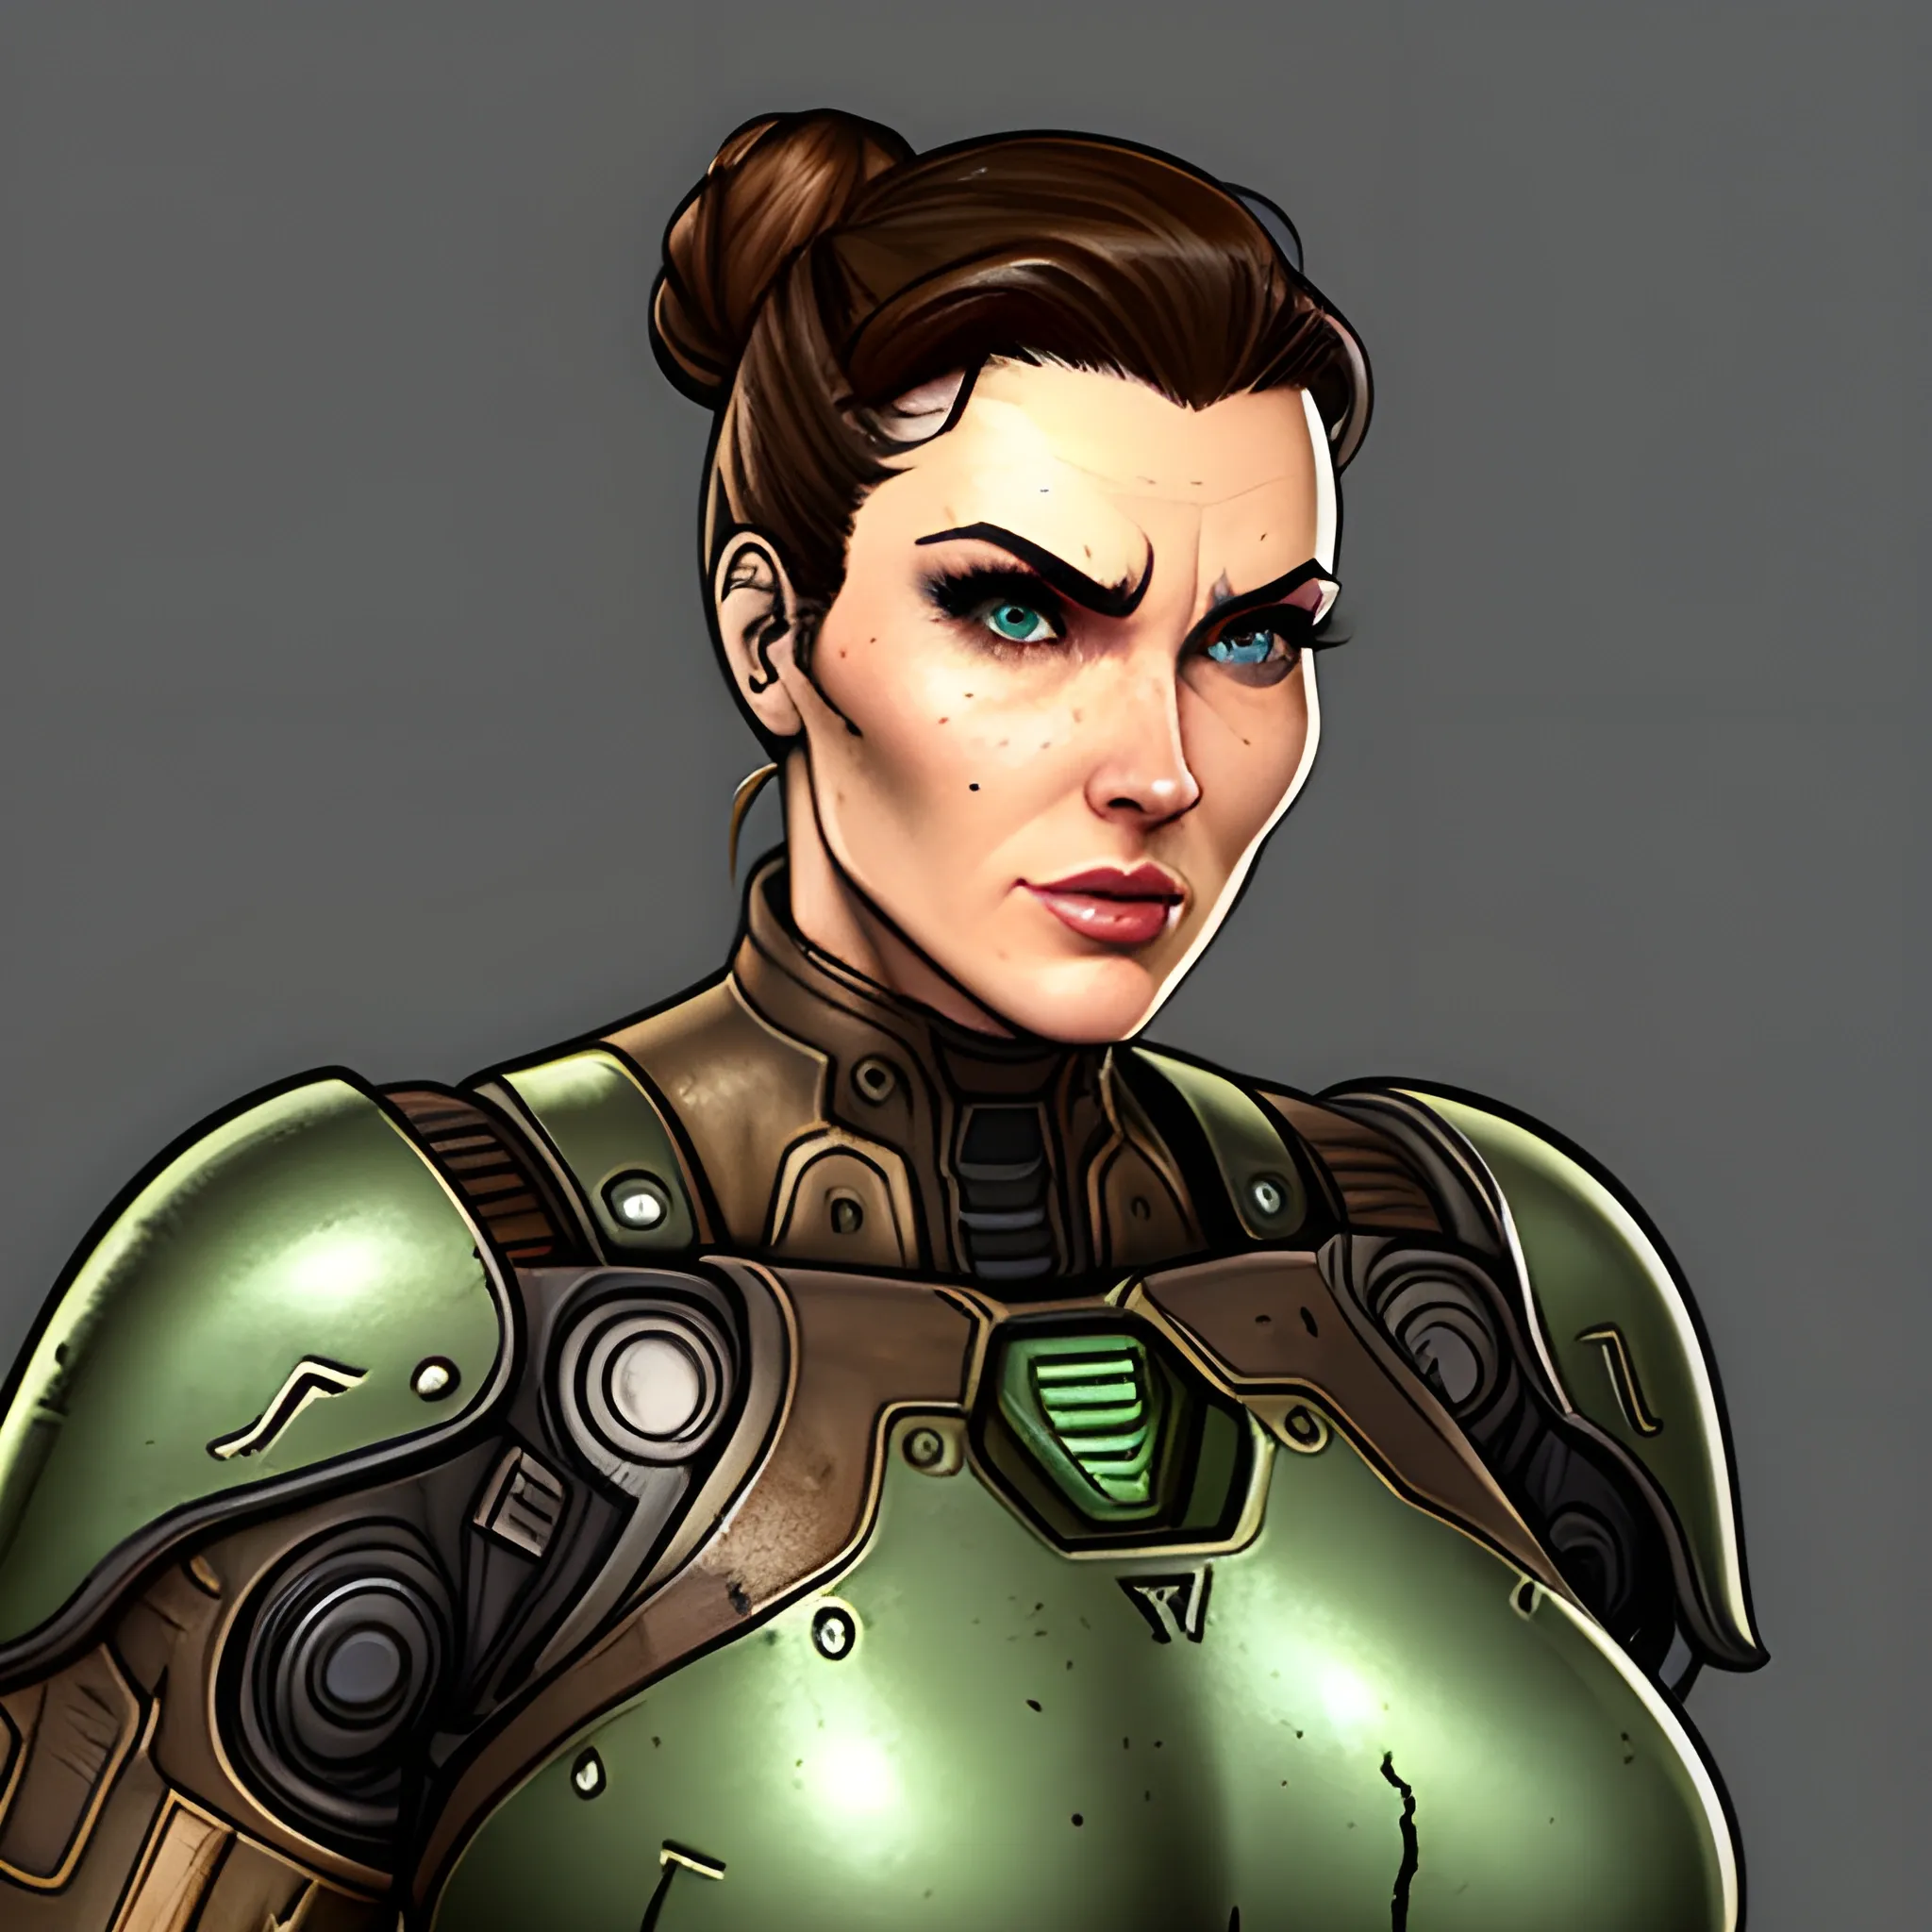 strong fat girl from Fallout 4, brotherhood of steel armor, pine-green eyes, brown hair tied into a bun